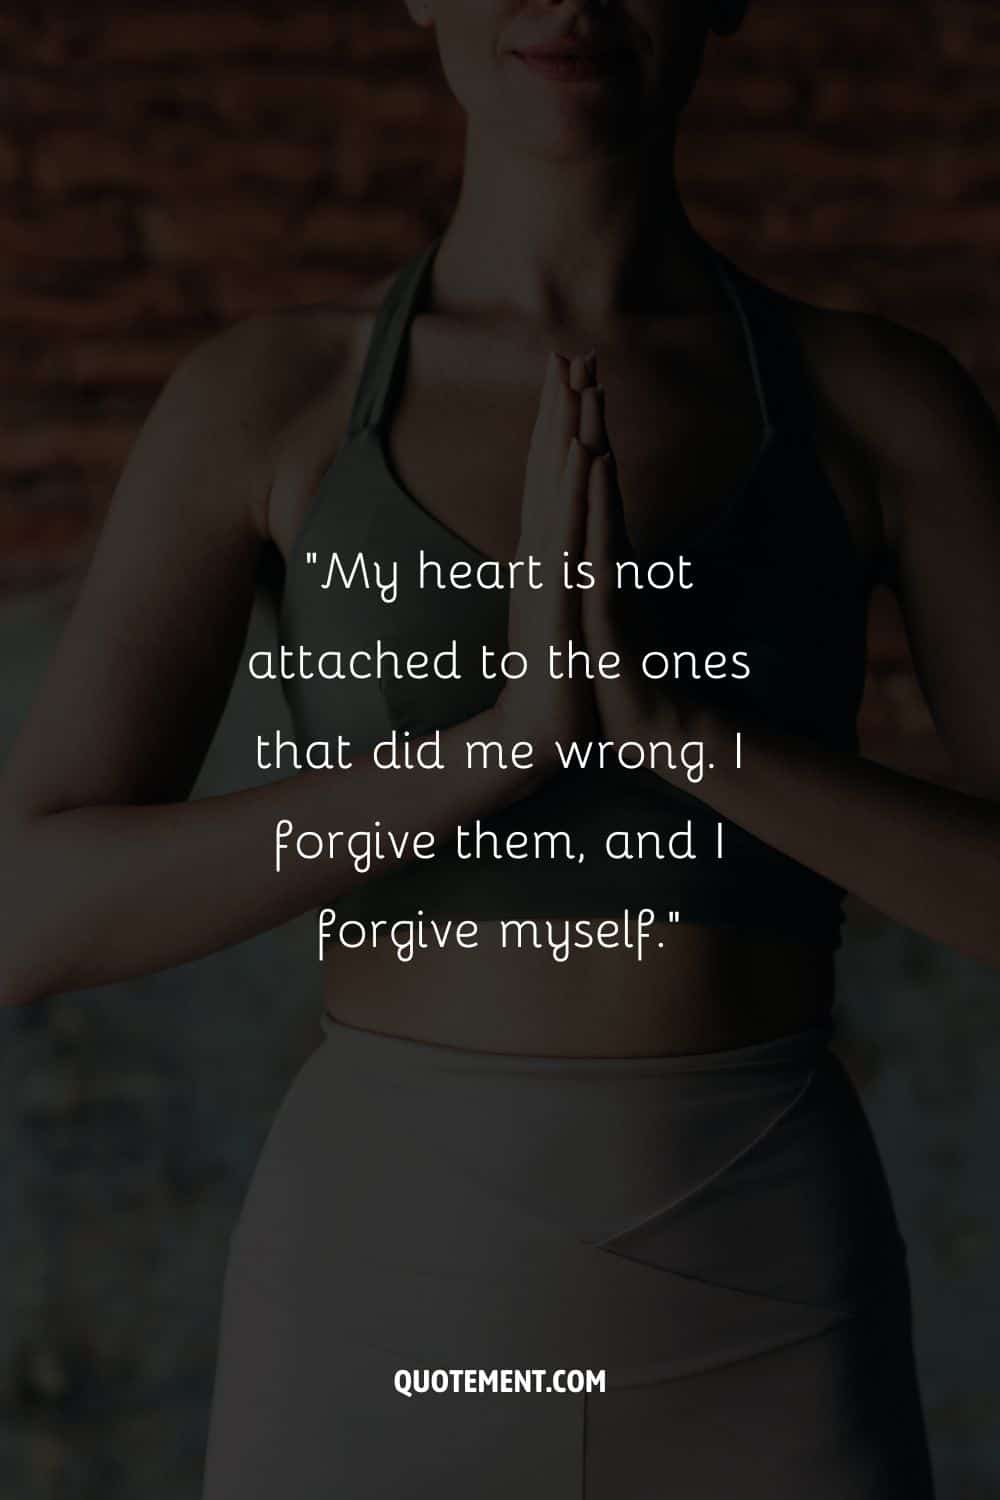 My heart is not attached to the ones that did me wrong. I forgive them, and I forgive myself